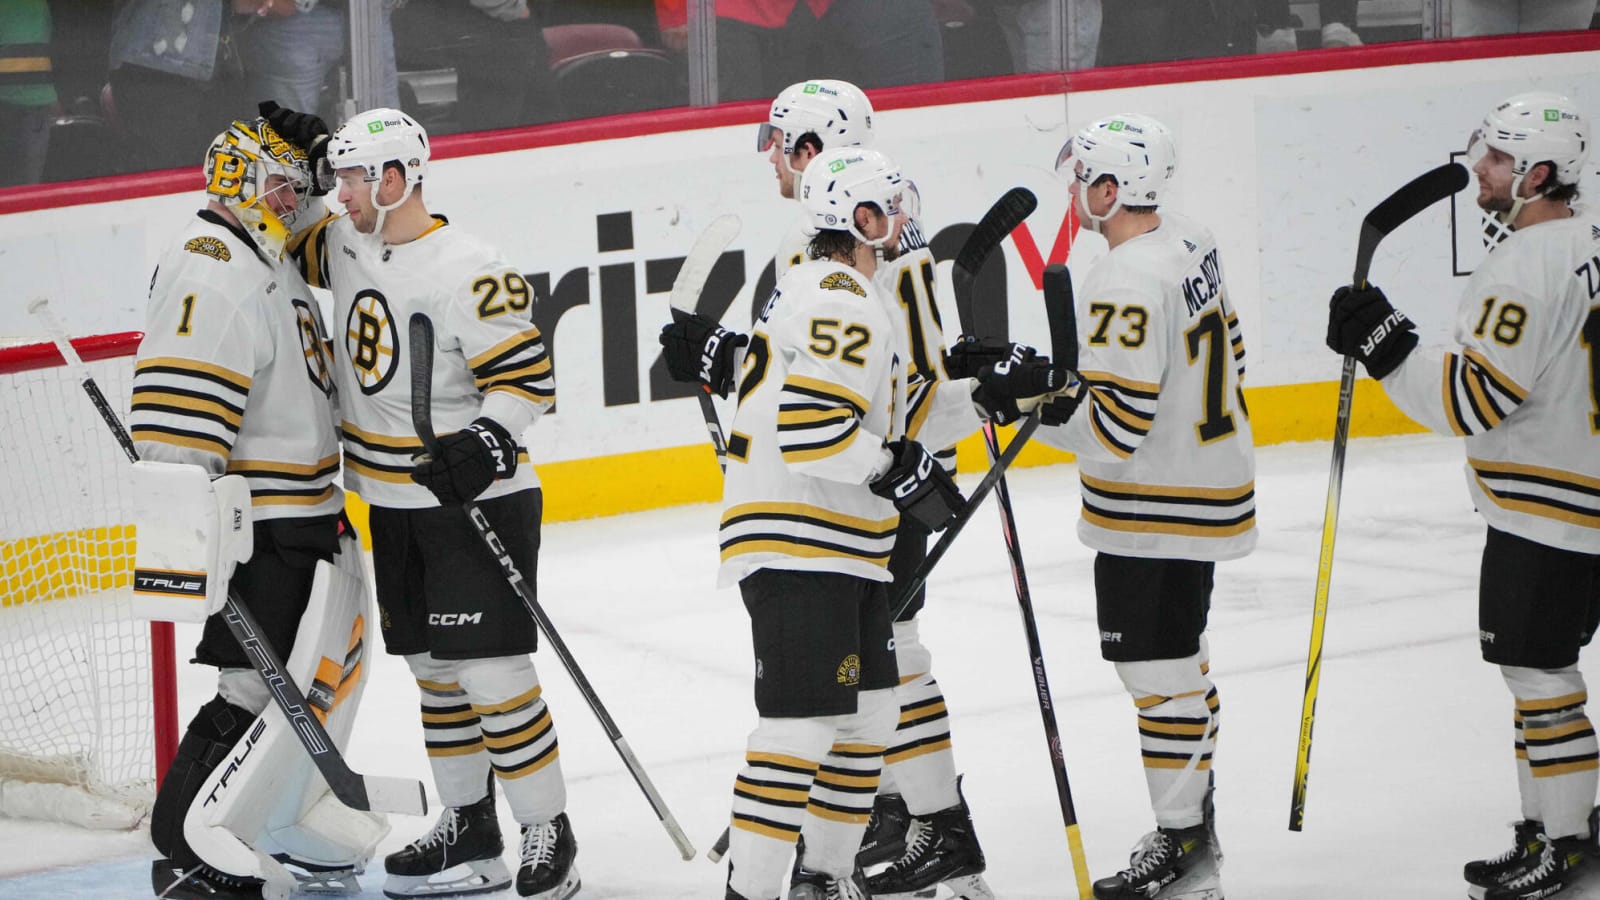 Bruins and Panthers: A Rivalry That is Really Heating Up